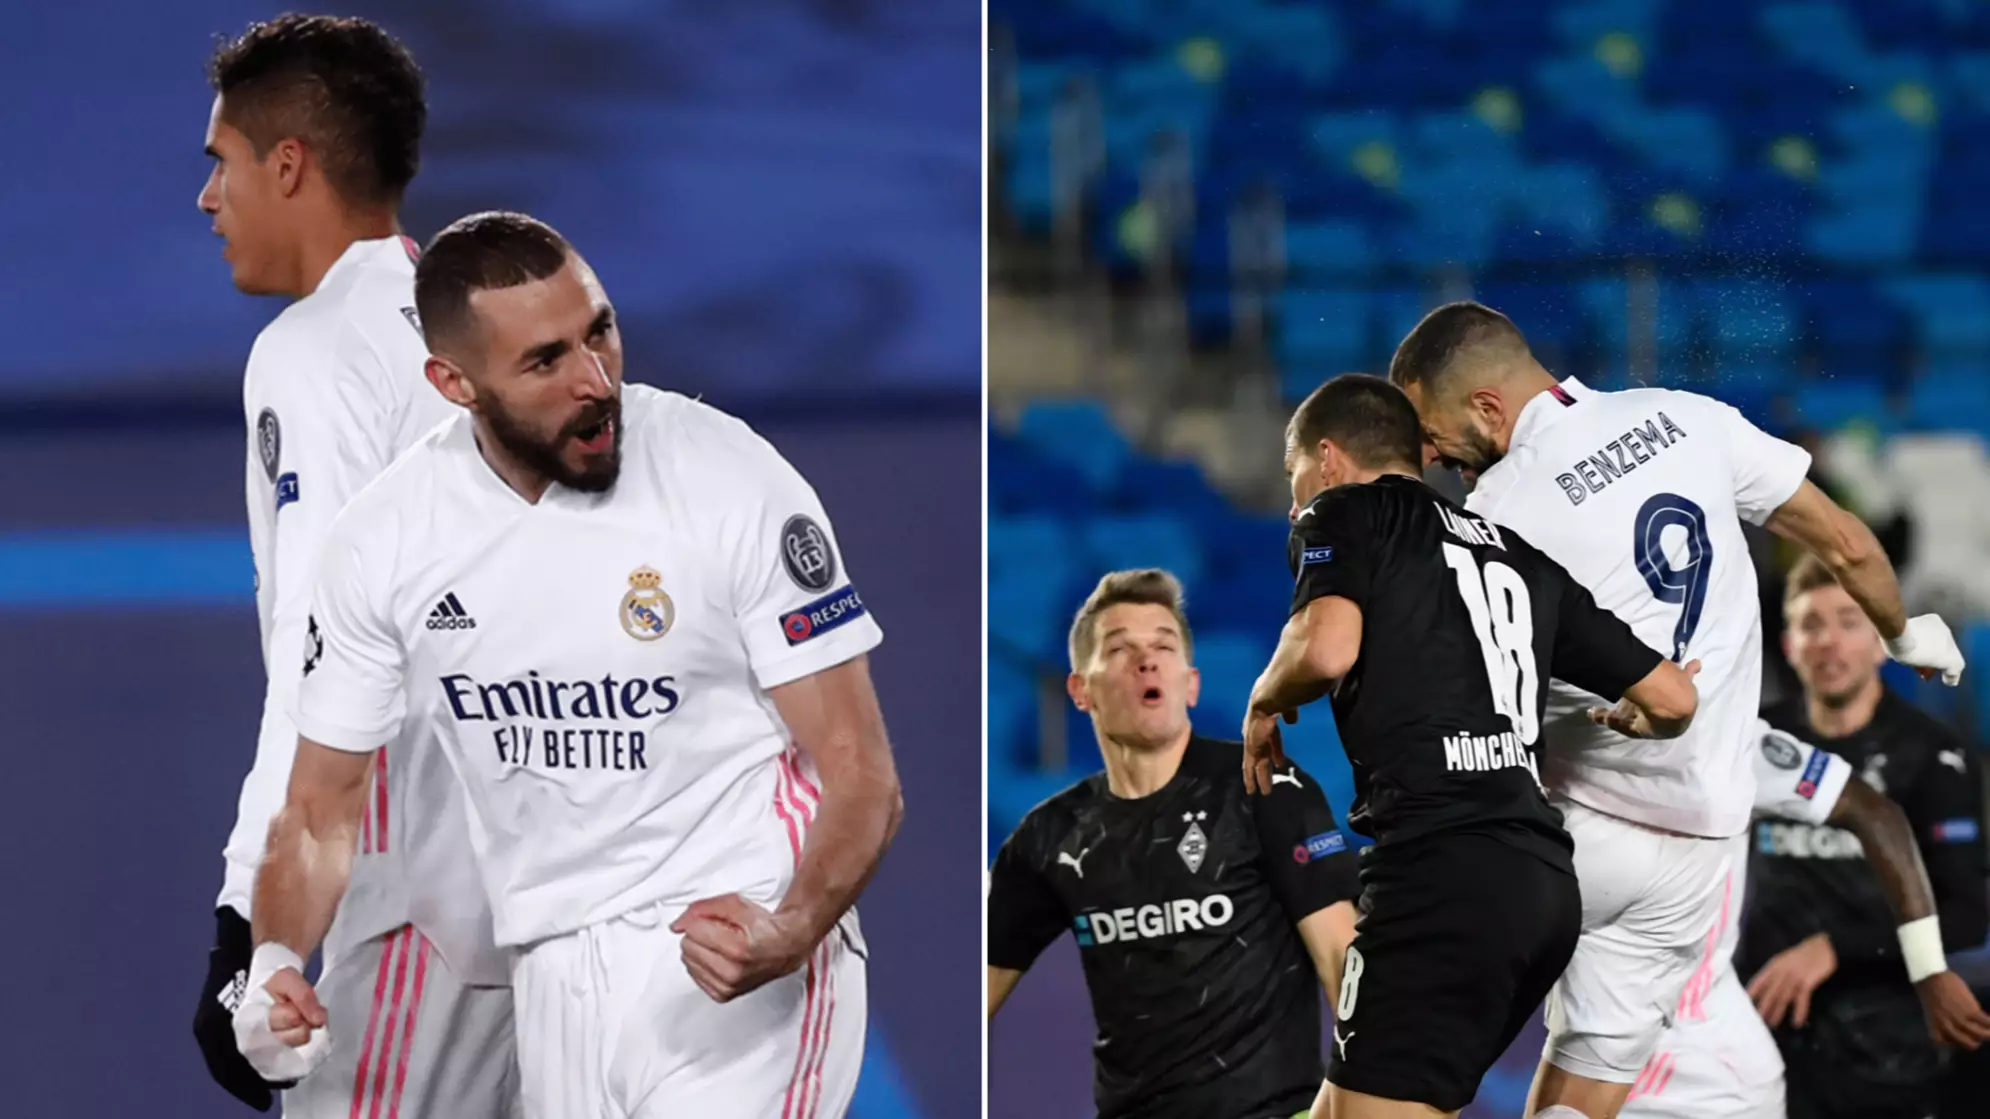 Karim Benzema Comes Up Clutch Again With Brace In Huge Game For Real Madrid